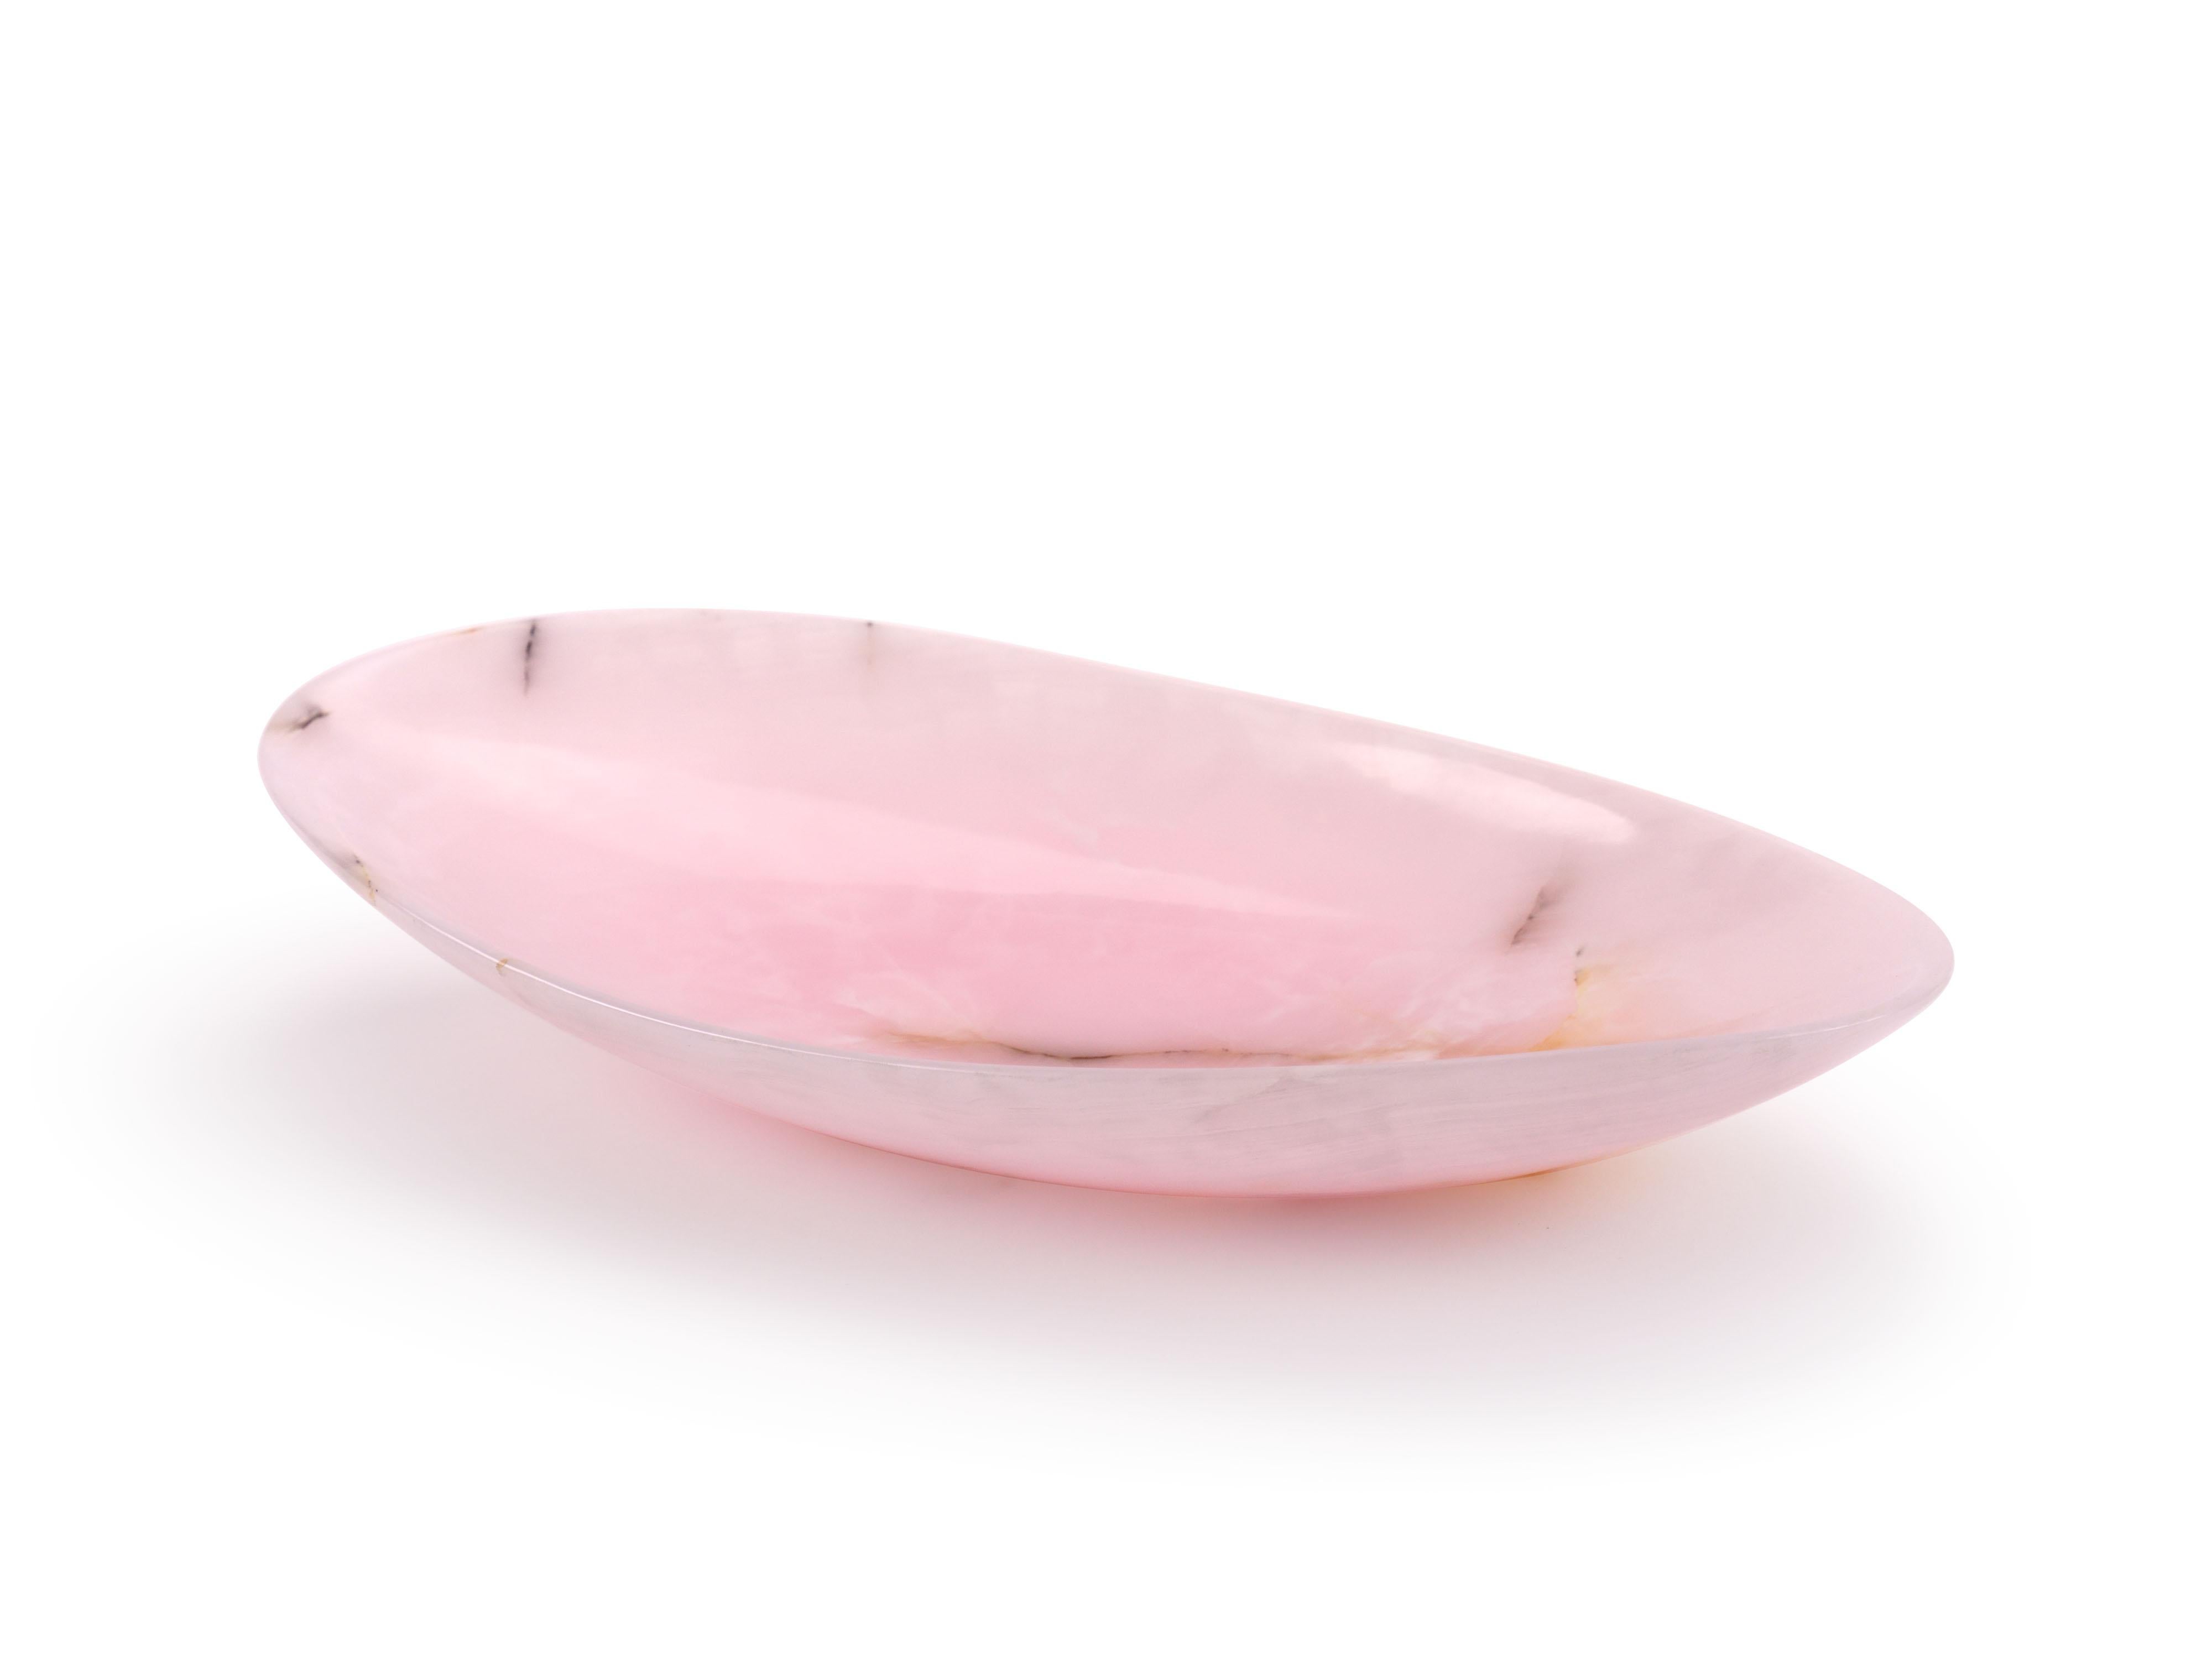 Italian Pink Onyx Decorative Bowl Centerpiece Vase Vessel Sculpture Hand Carved, Italy For Sale